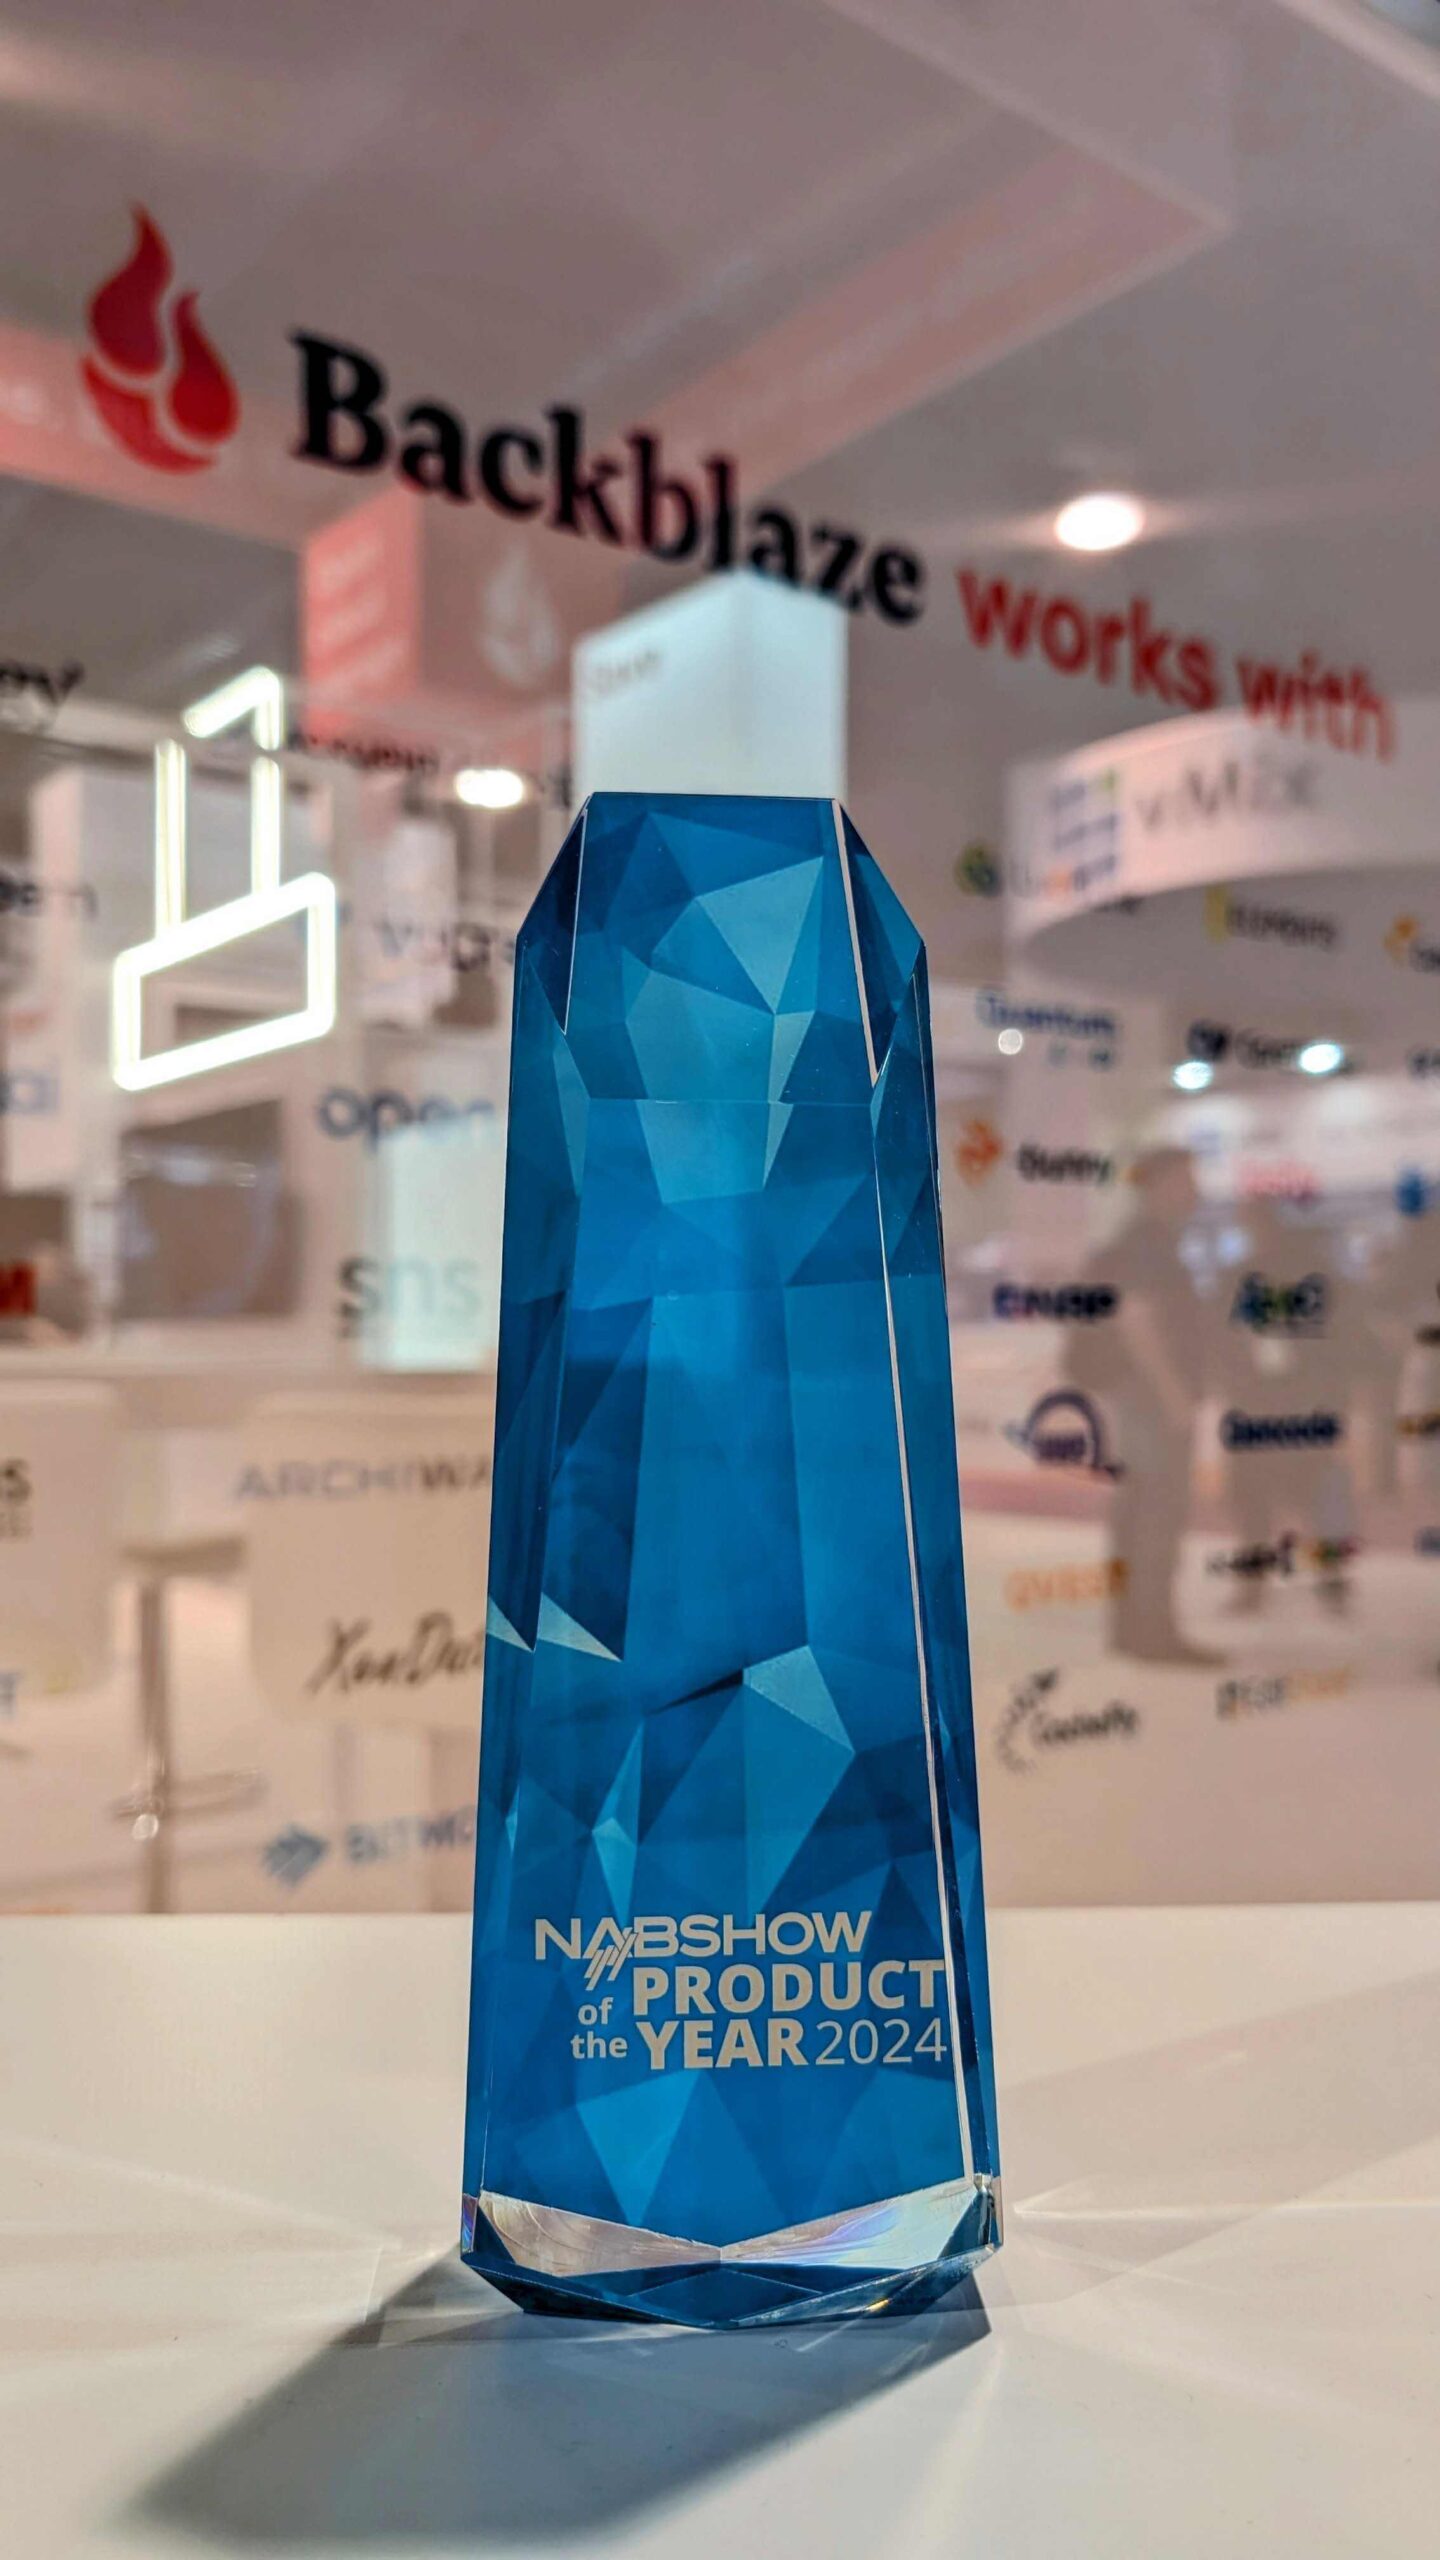 A photograph of the 2024 Product of the Year trophy. Backblaze won this award for their new feature, Event Notifications.